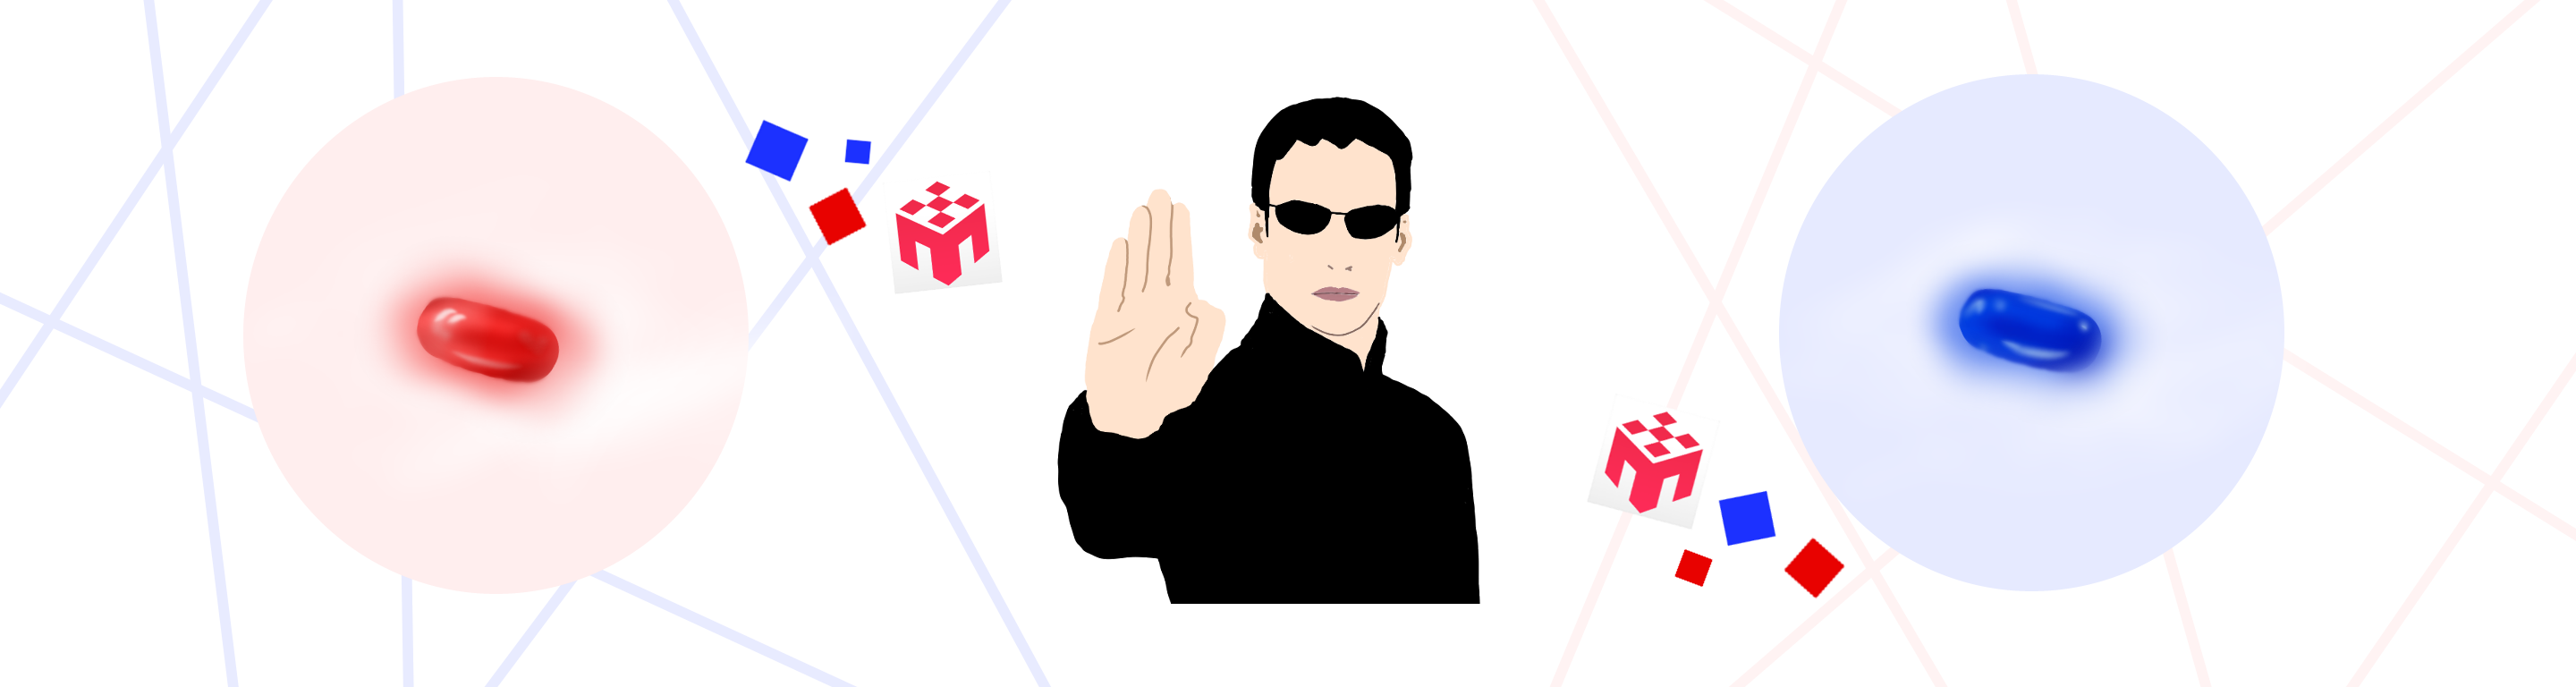 Illustration of a man with his palm up, red pill on the left and blue pill on the right